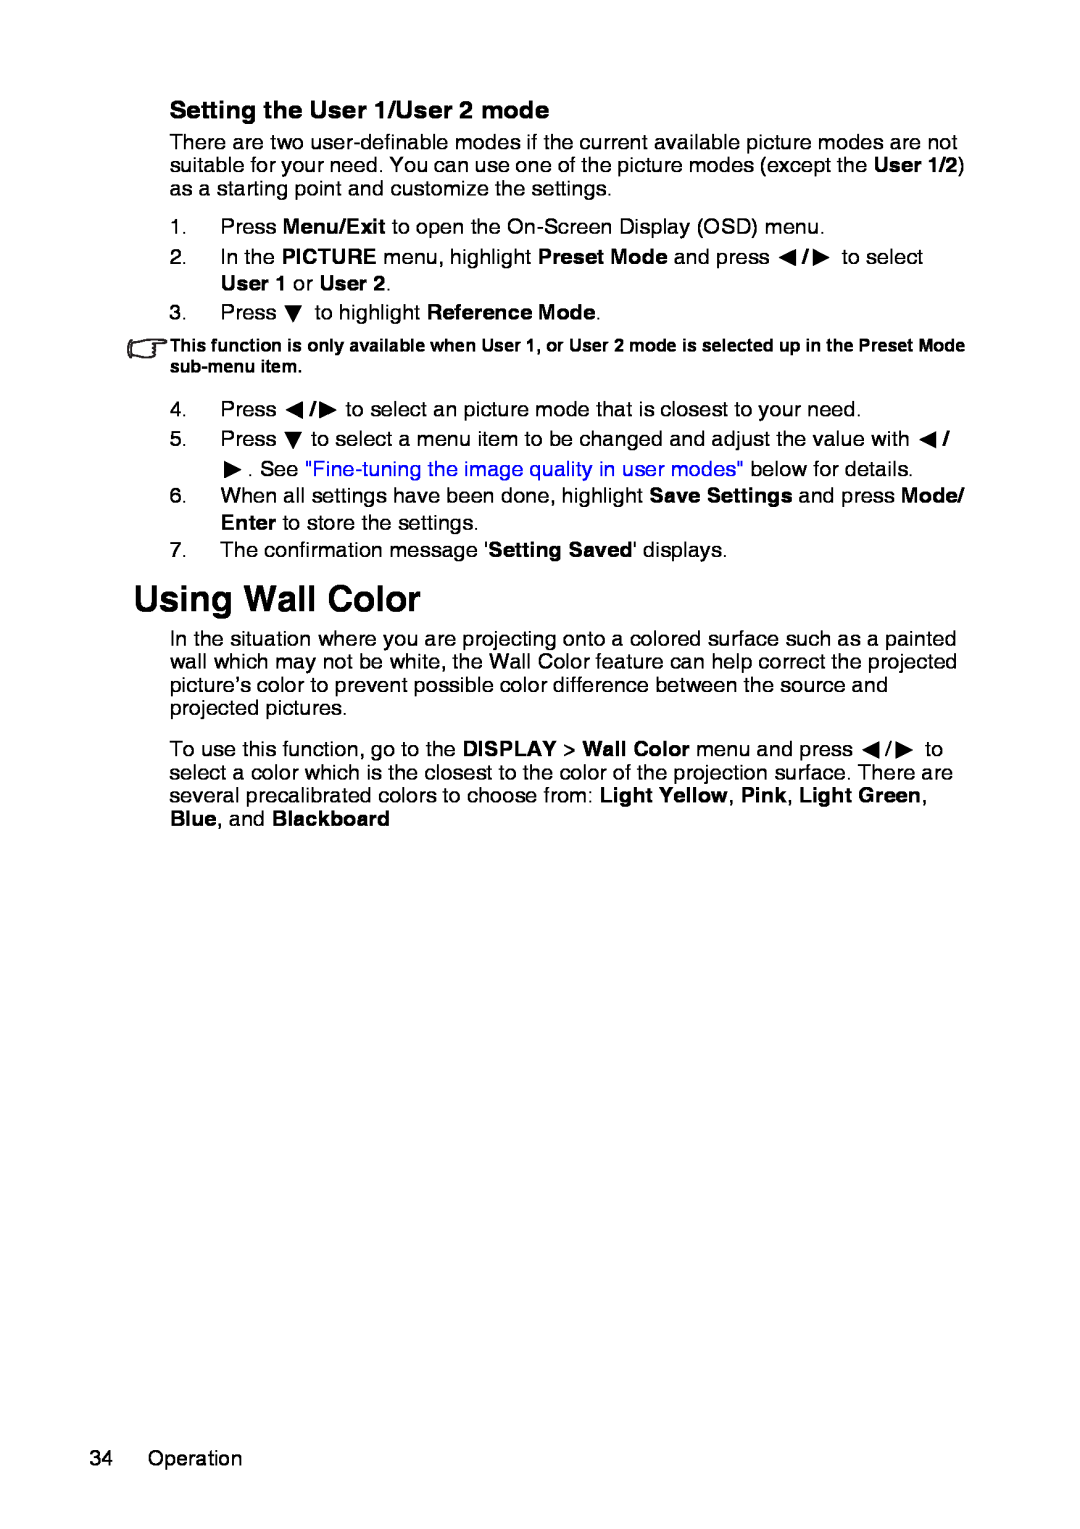 InFocus XS1 manual Using Wall Color, Setting the User 1/User 2 mode 